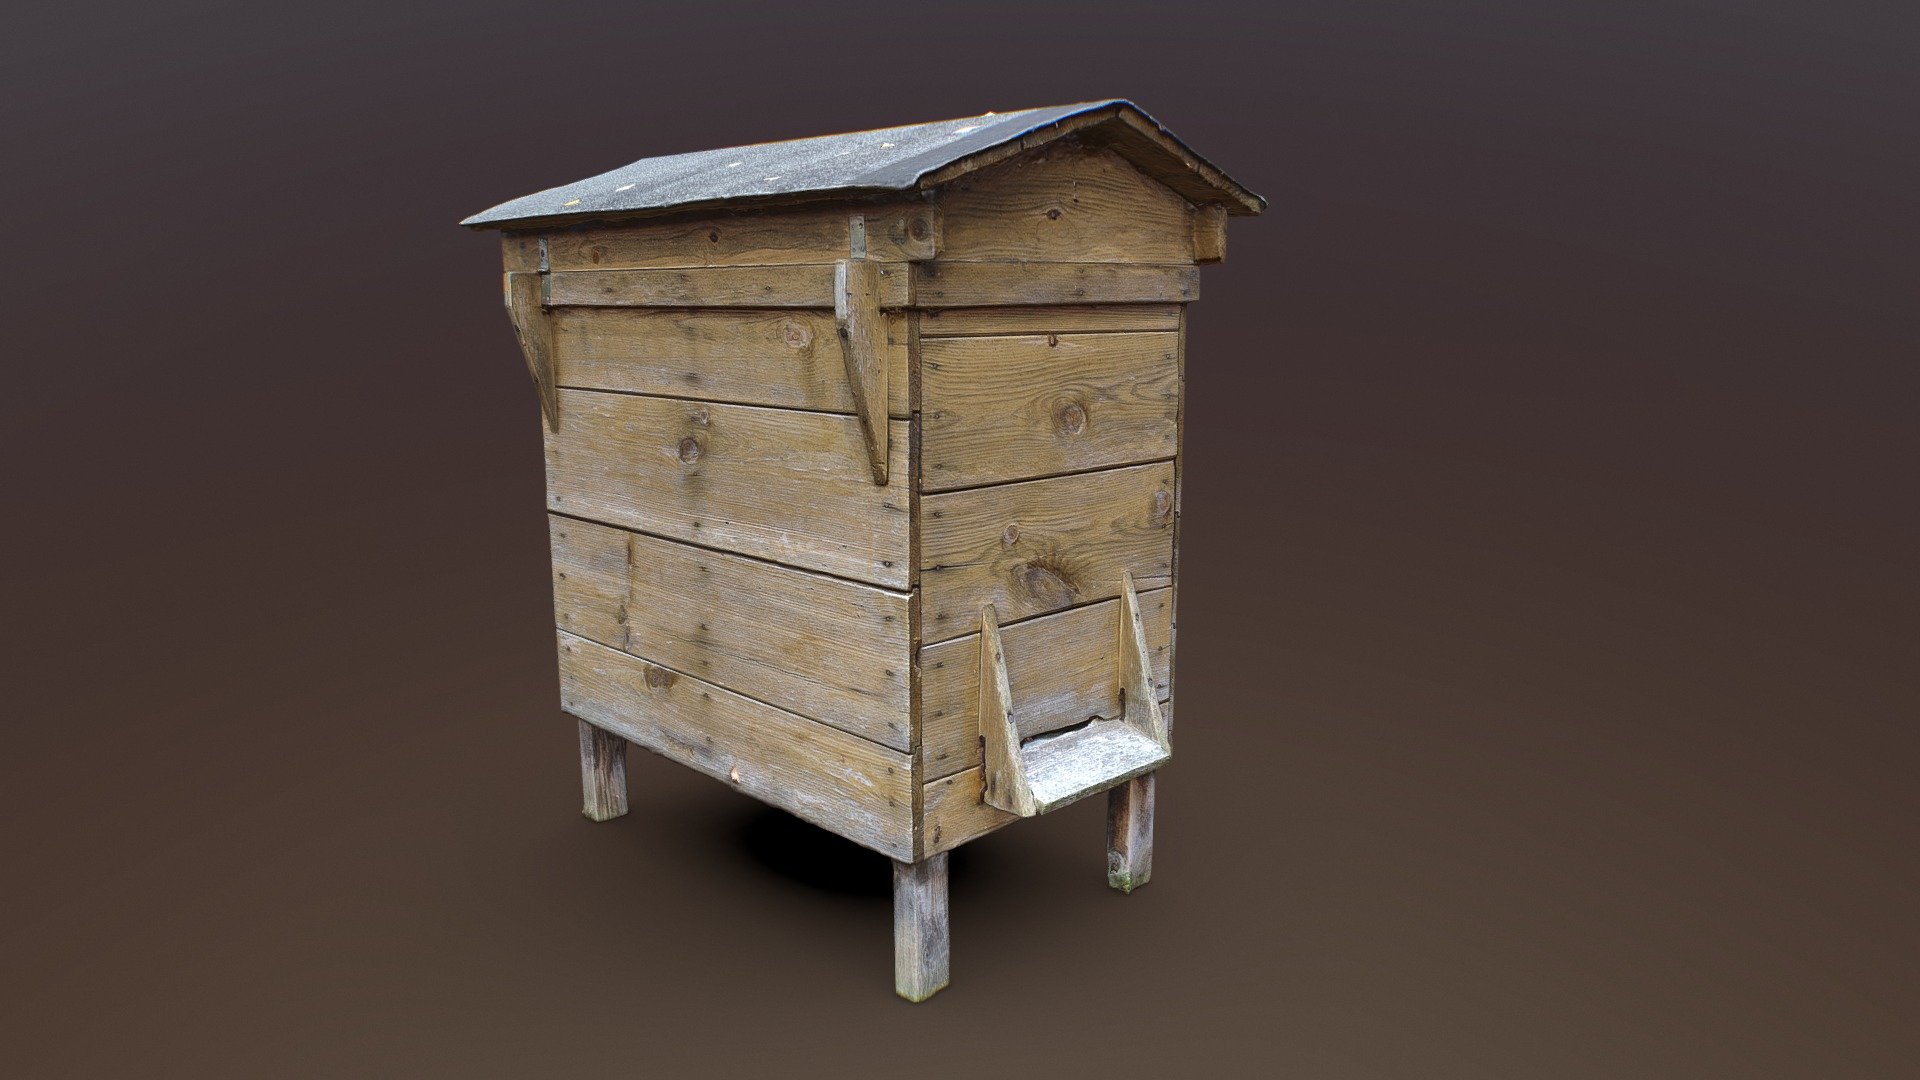 High quality 3D-scanned wooden bee house. Perfect to put in a village/countryside environment. 

4K PBR maps + blend file free at:
https://www.blenderboom.com/product/beehive-box/ - Beehive box - Download Free 3D model by blenderboom 3d model